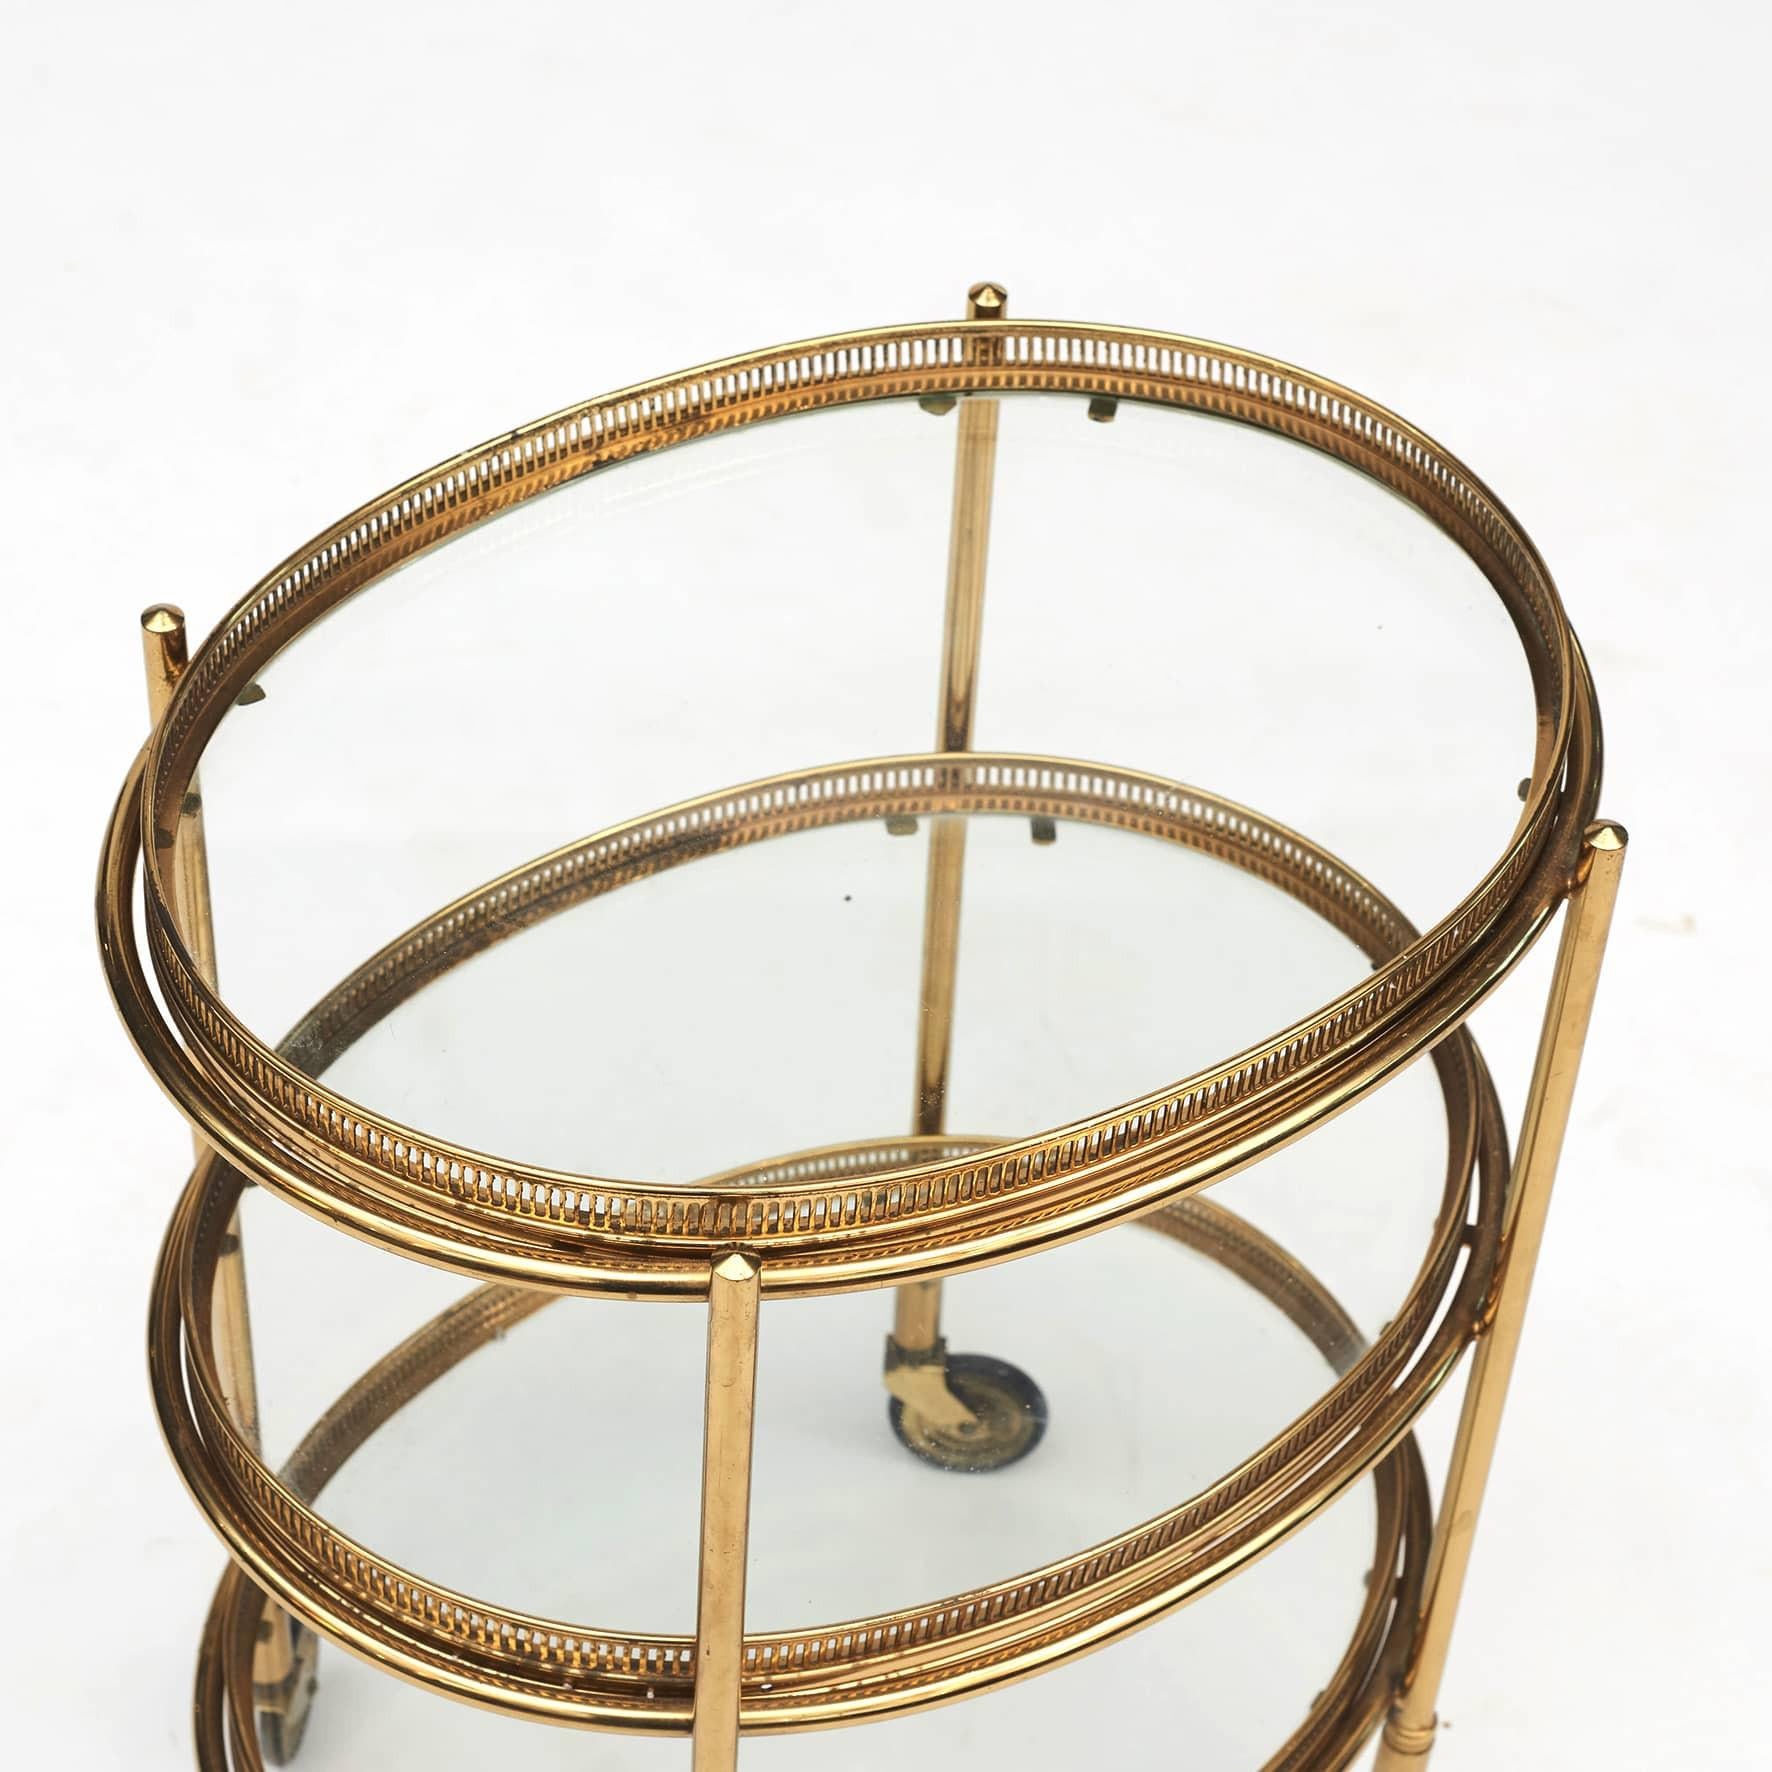 Italian three tier bar cart / étagère made of brass with glass trays.
Three removable trays with clear glass center and pierced brass gallery rails. Brass and black rubber wheels.
In the style of Maison Jansen. Italy c. 1950.

Perfect condition.